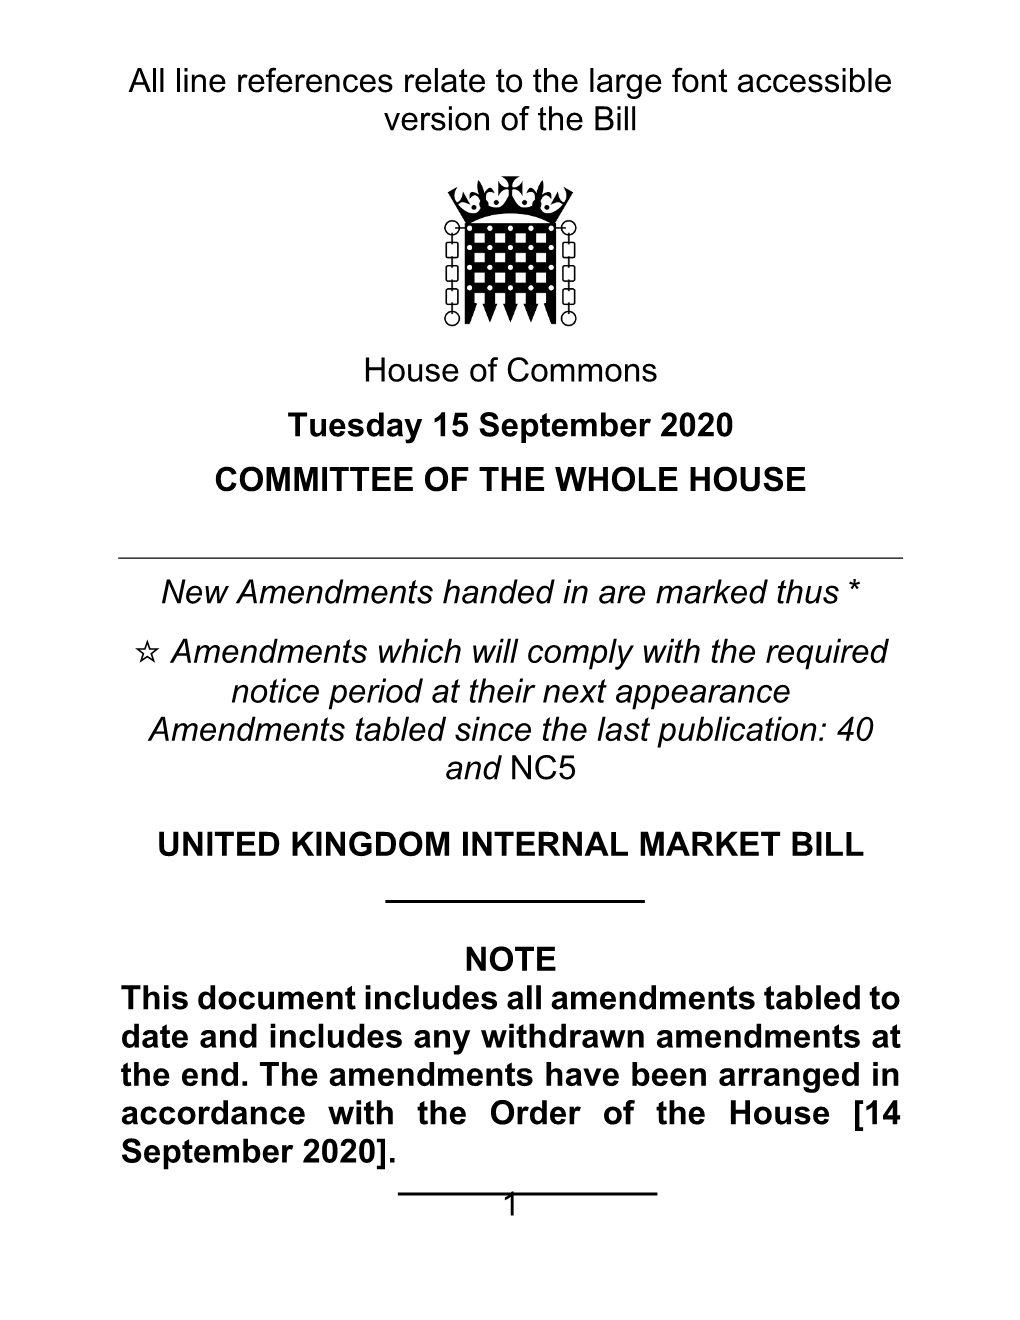 Line References Relate to the Large Font Accessible Version of the Bill